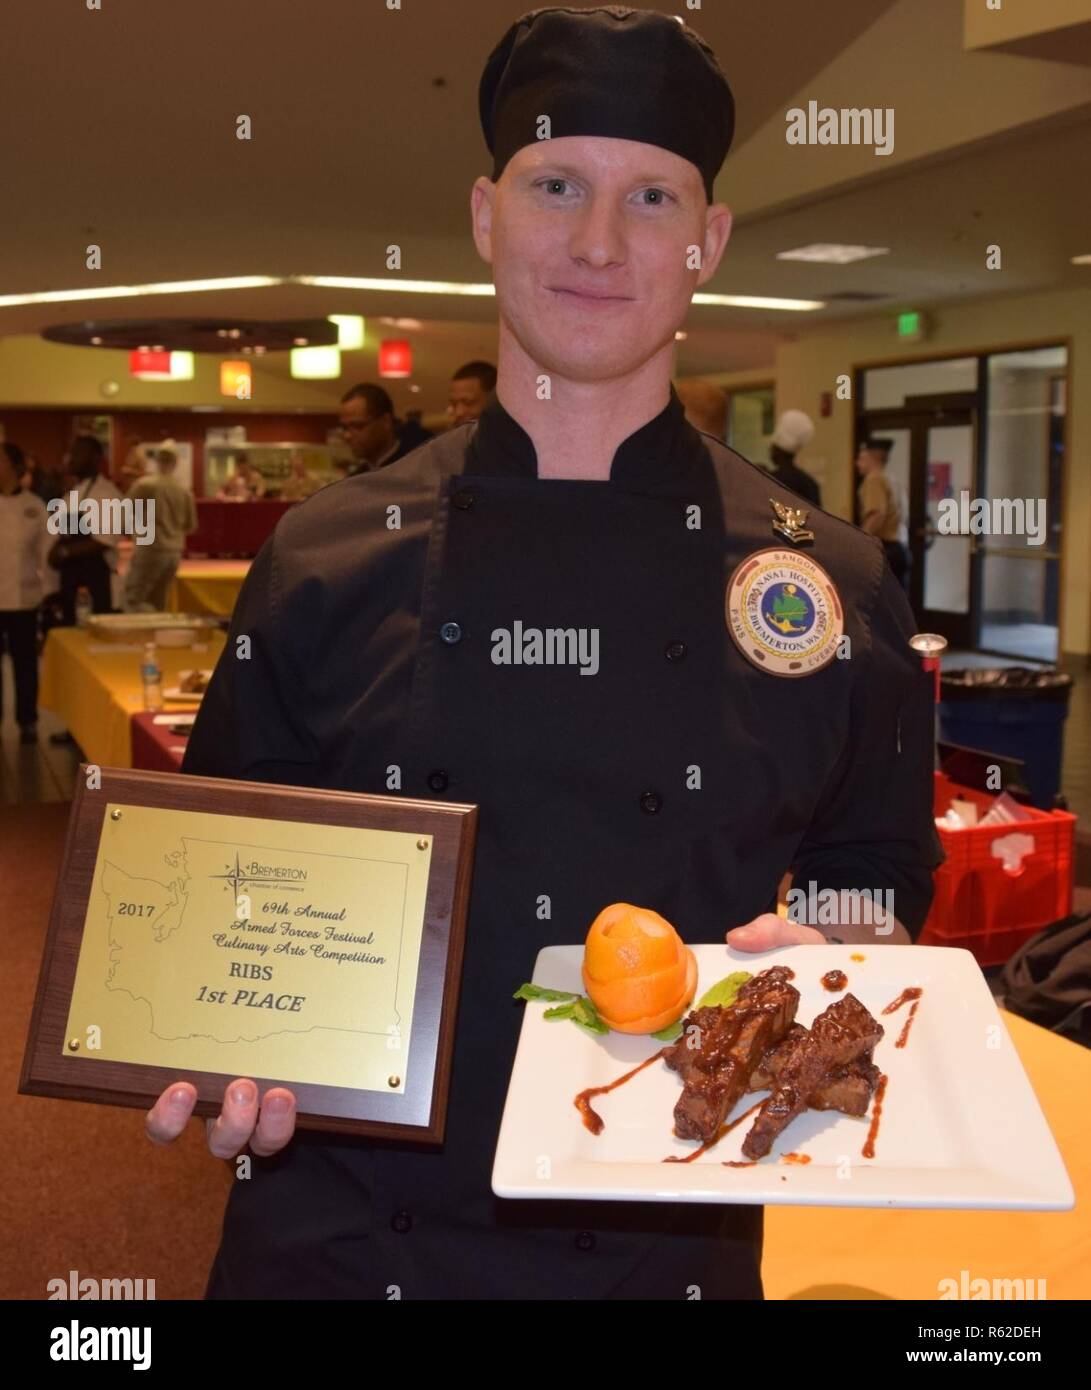 A handful of excellence...the 2017 69th Annual Armed Force Festival’s Culinary Arts Competition winner in the highly-contested 'Ribs' category was awarded to Culinary Specialist 2nd Class Christopher Wojcik of Naval Hospital Bremerton Stock Photo